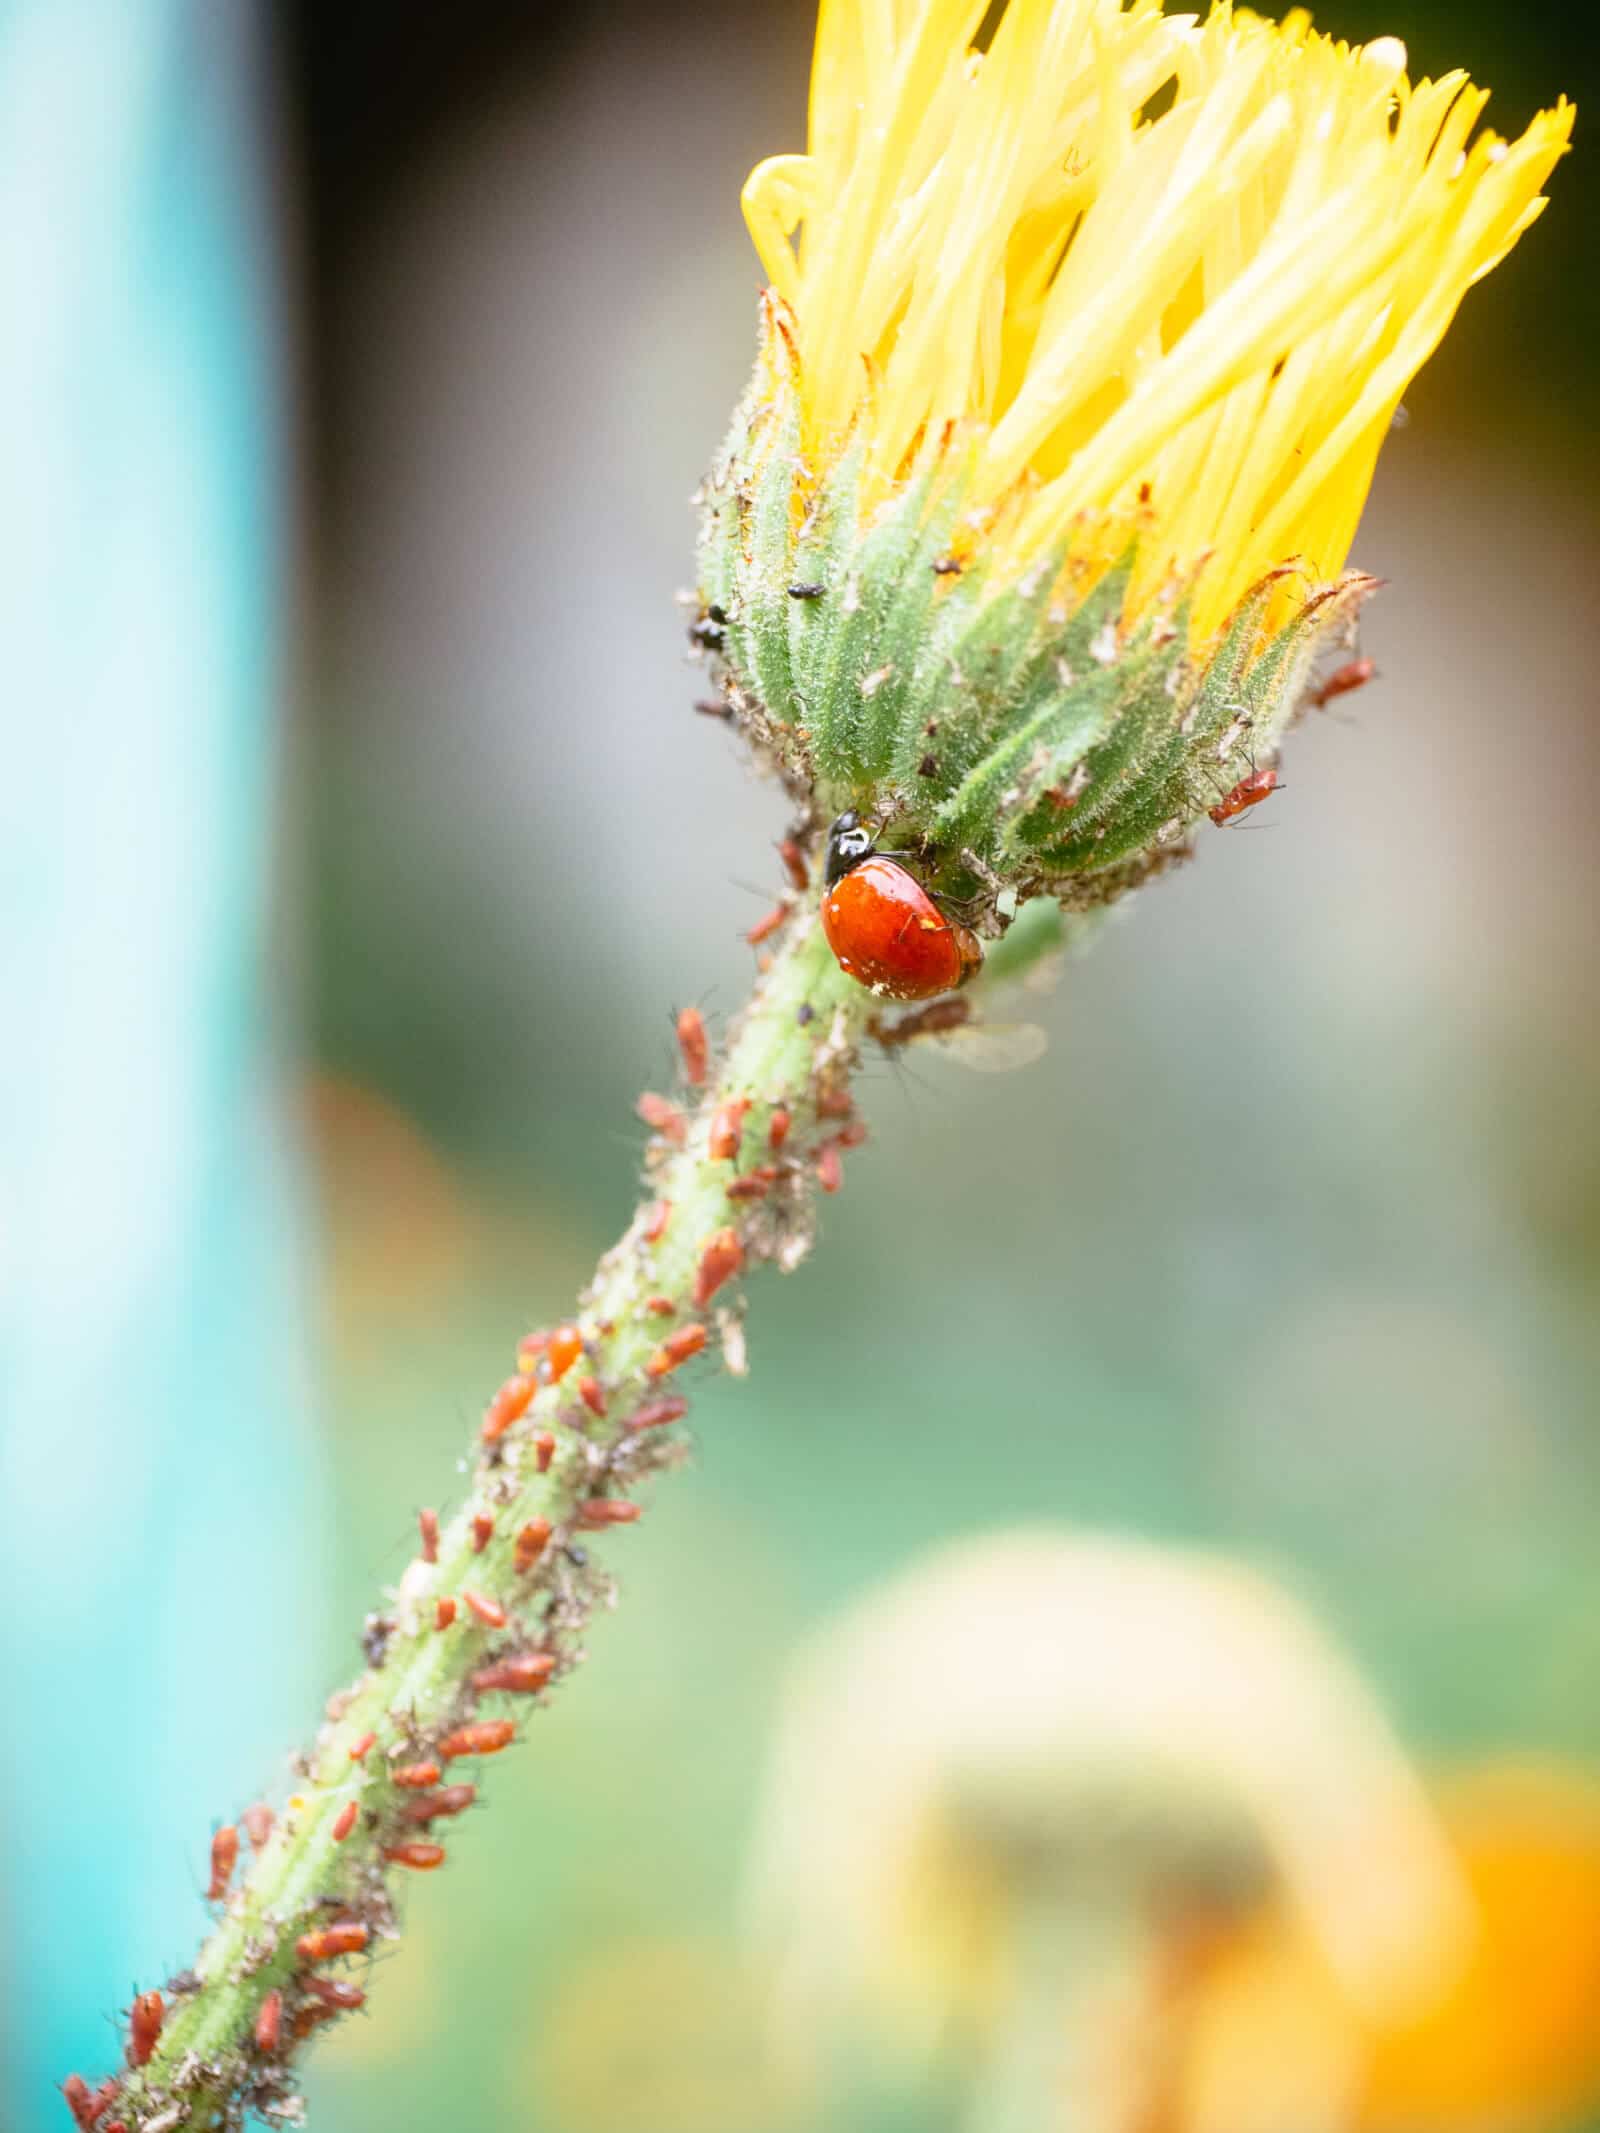 Ladybugs are natural predators of aphids